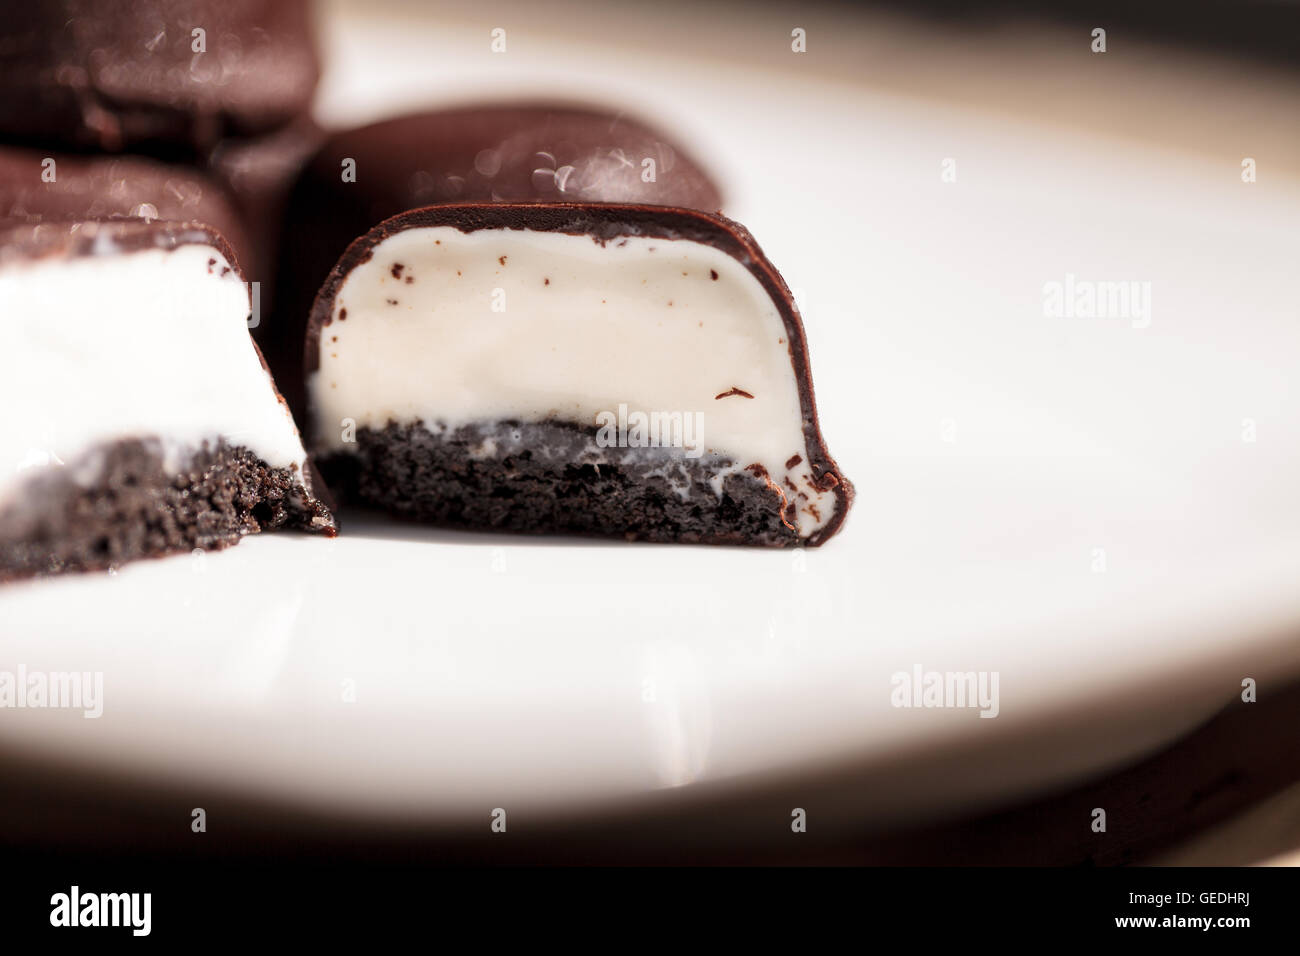 Vanilla ice cream bonbons covered in chocolate for desert on a white plate. Stock Photo